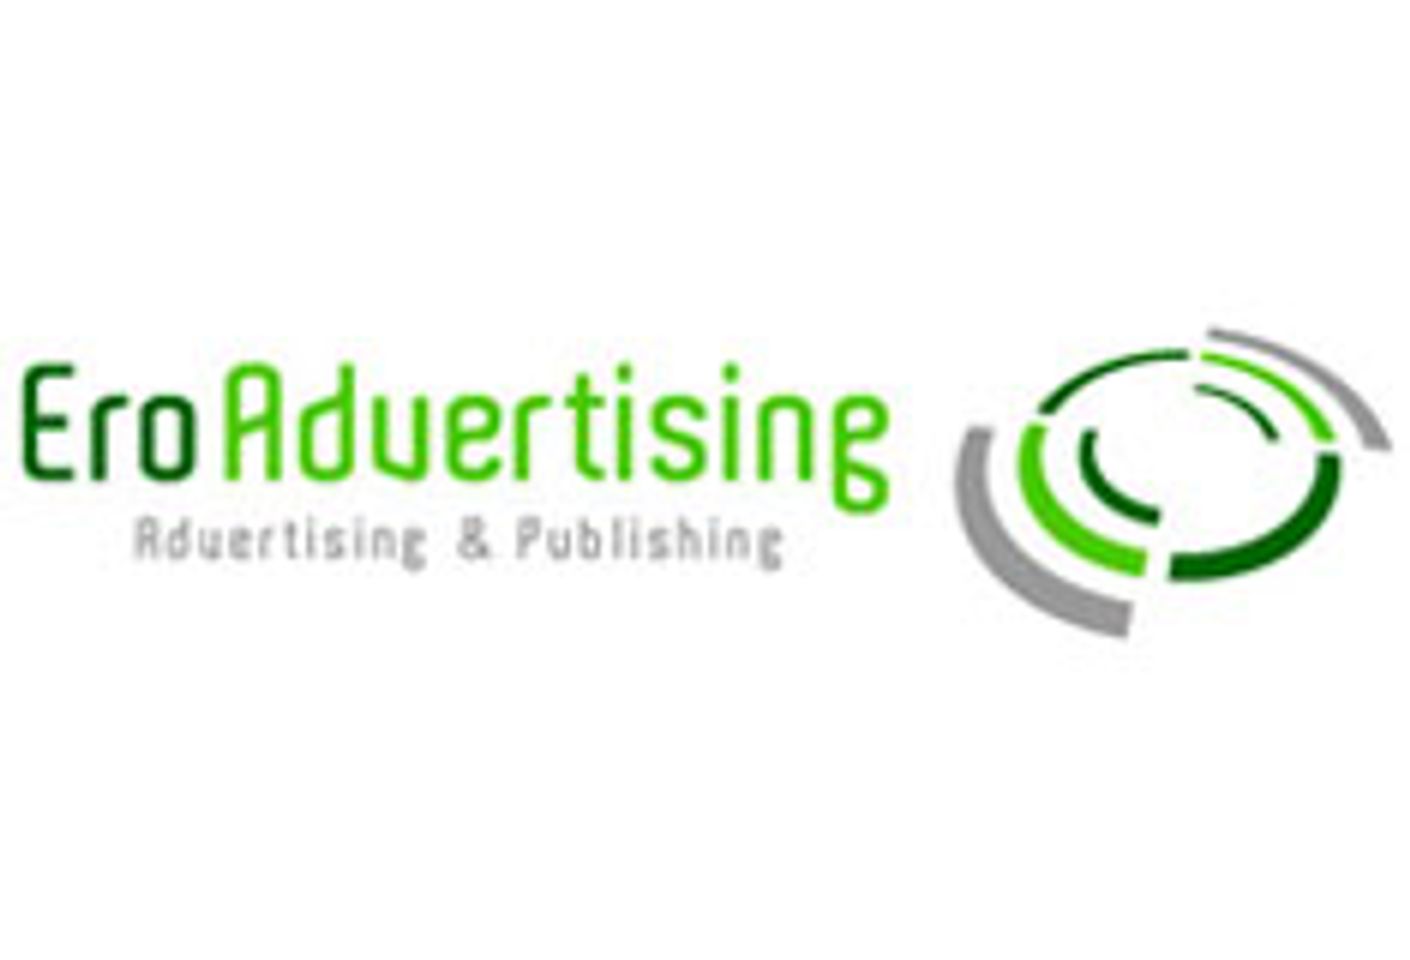 EroAdvertising Launches Mobile Interstitial Ads